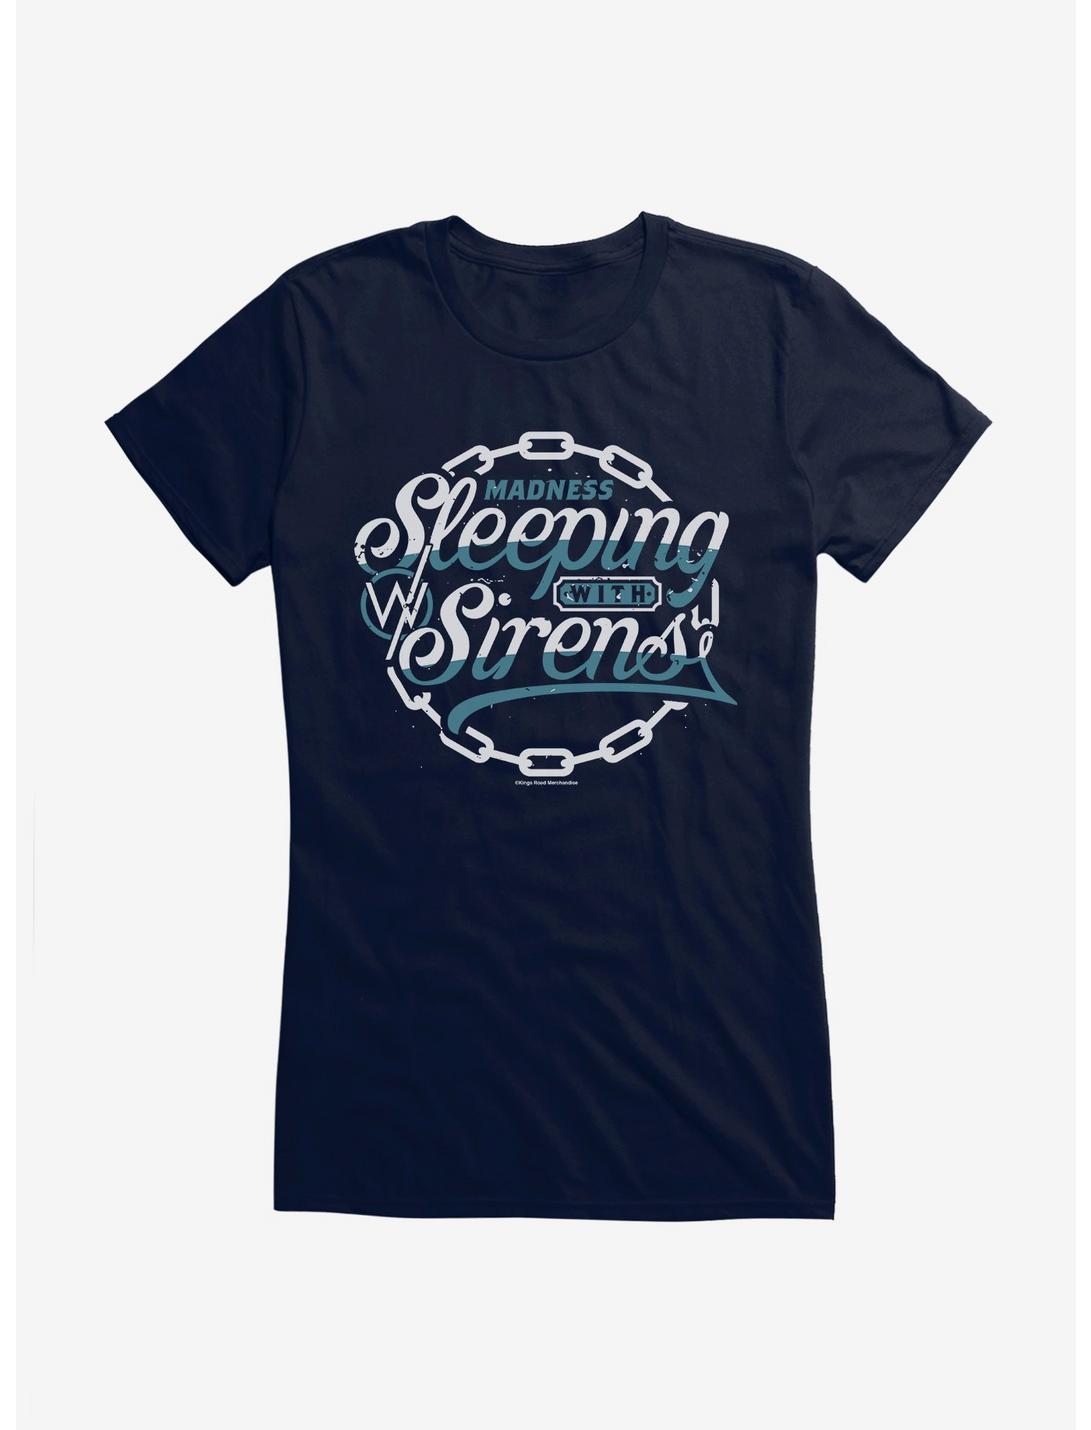 Sleeping With Sirens Madness Girls T-Shirt, NAVY, hi-res